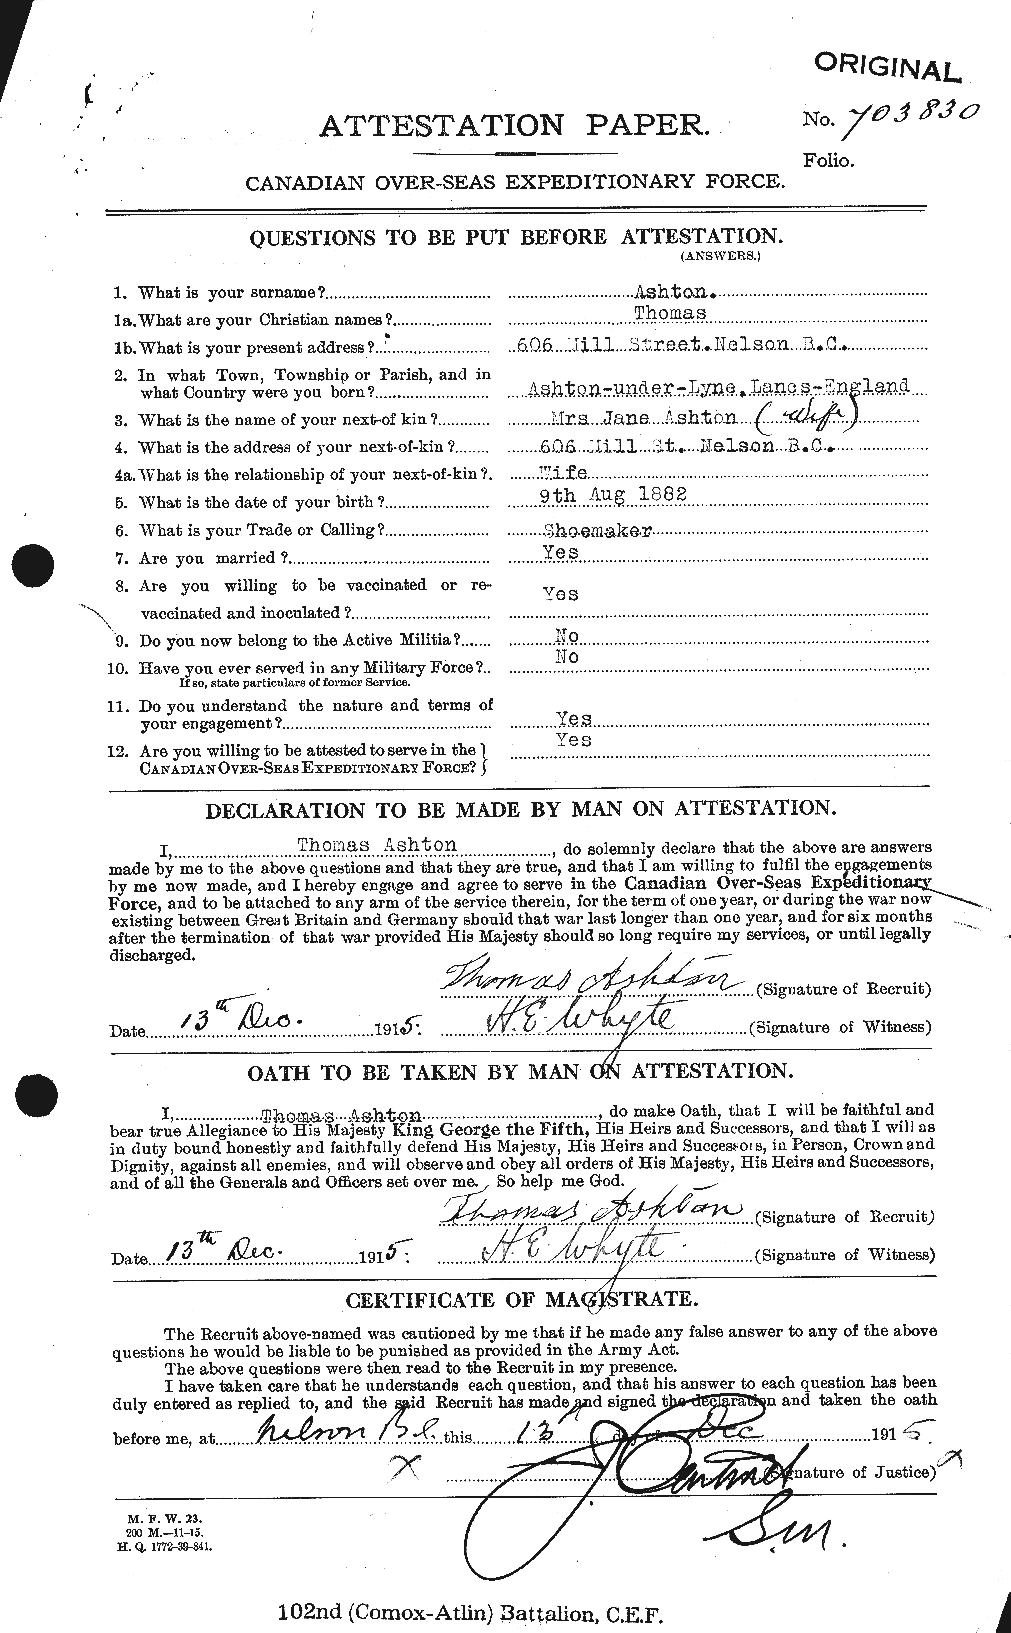 Personnel Records of the First World War - CEF 223807a